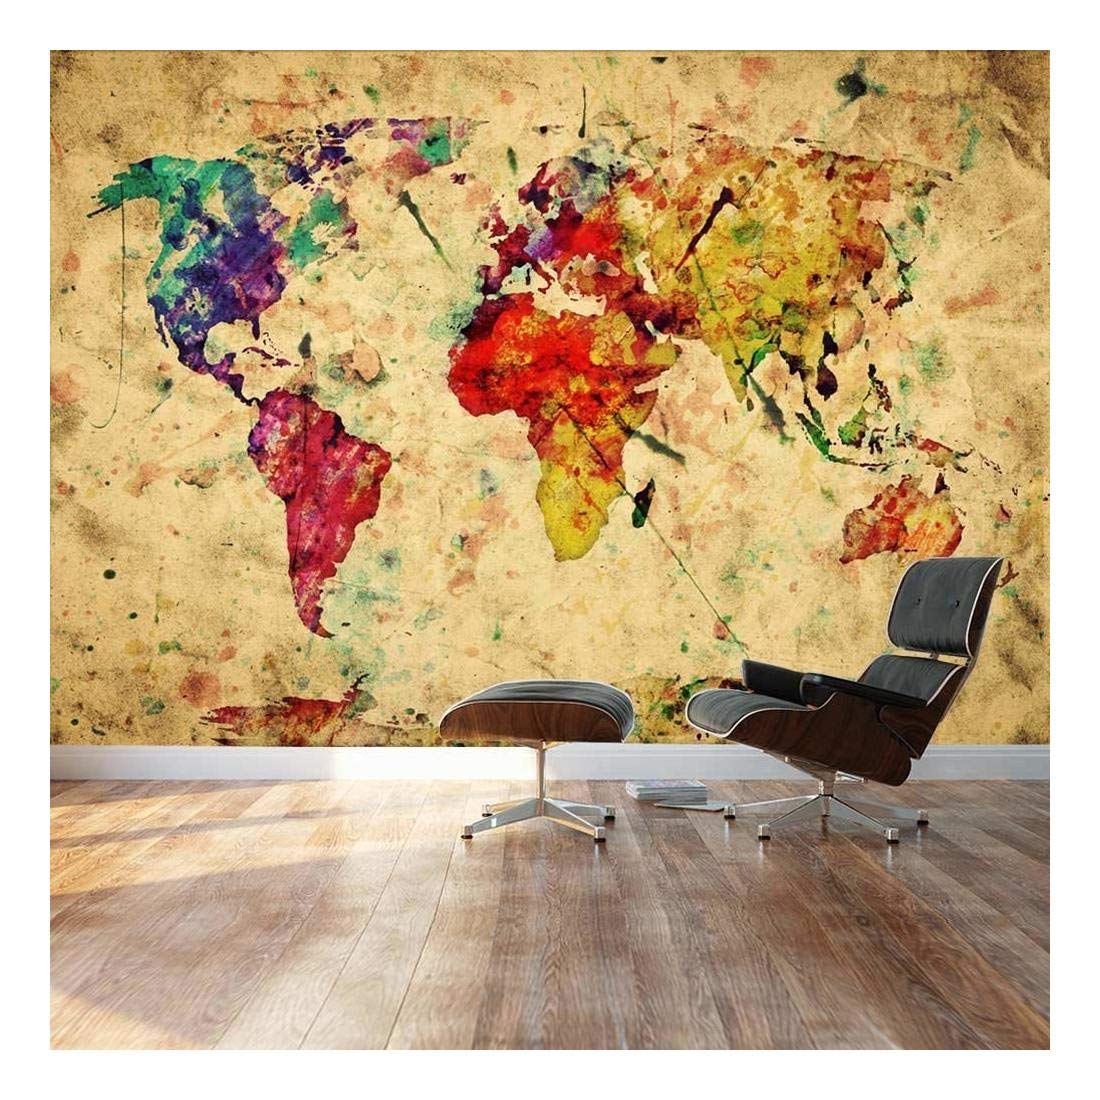 Amazon - Com - Wall26 - Large Wall Mural - Grunge/vintage - Vintage World Map Background Hd , HD Wallpaper & Backgrounds